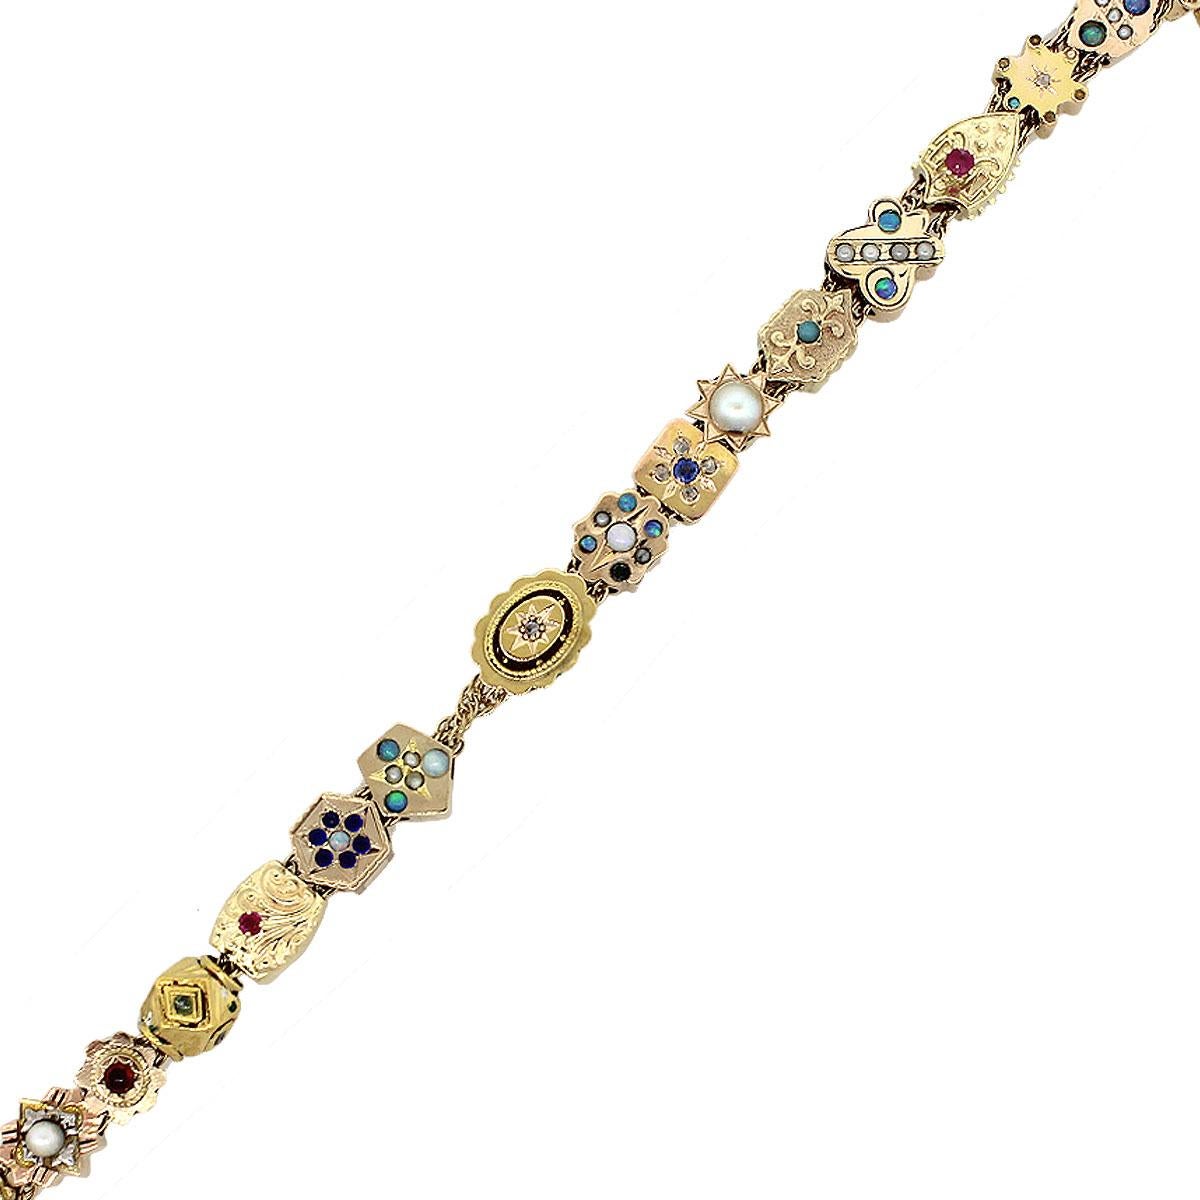 Material: 14k Yellow Gold
Gemstone Details: Pearl, cabochon Turquoise, Opal, pink tourmaline
Clasp: Tongue in box with safety latch
Measurement: It will fit up to a 7″ wrist
Total Weight: 21.6g (13.9dwt)
SKU: G8480